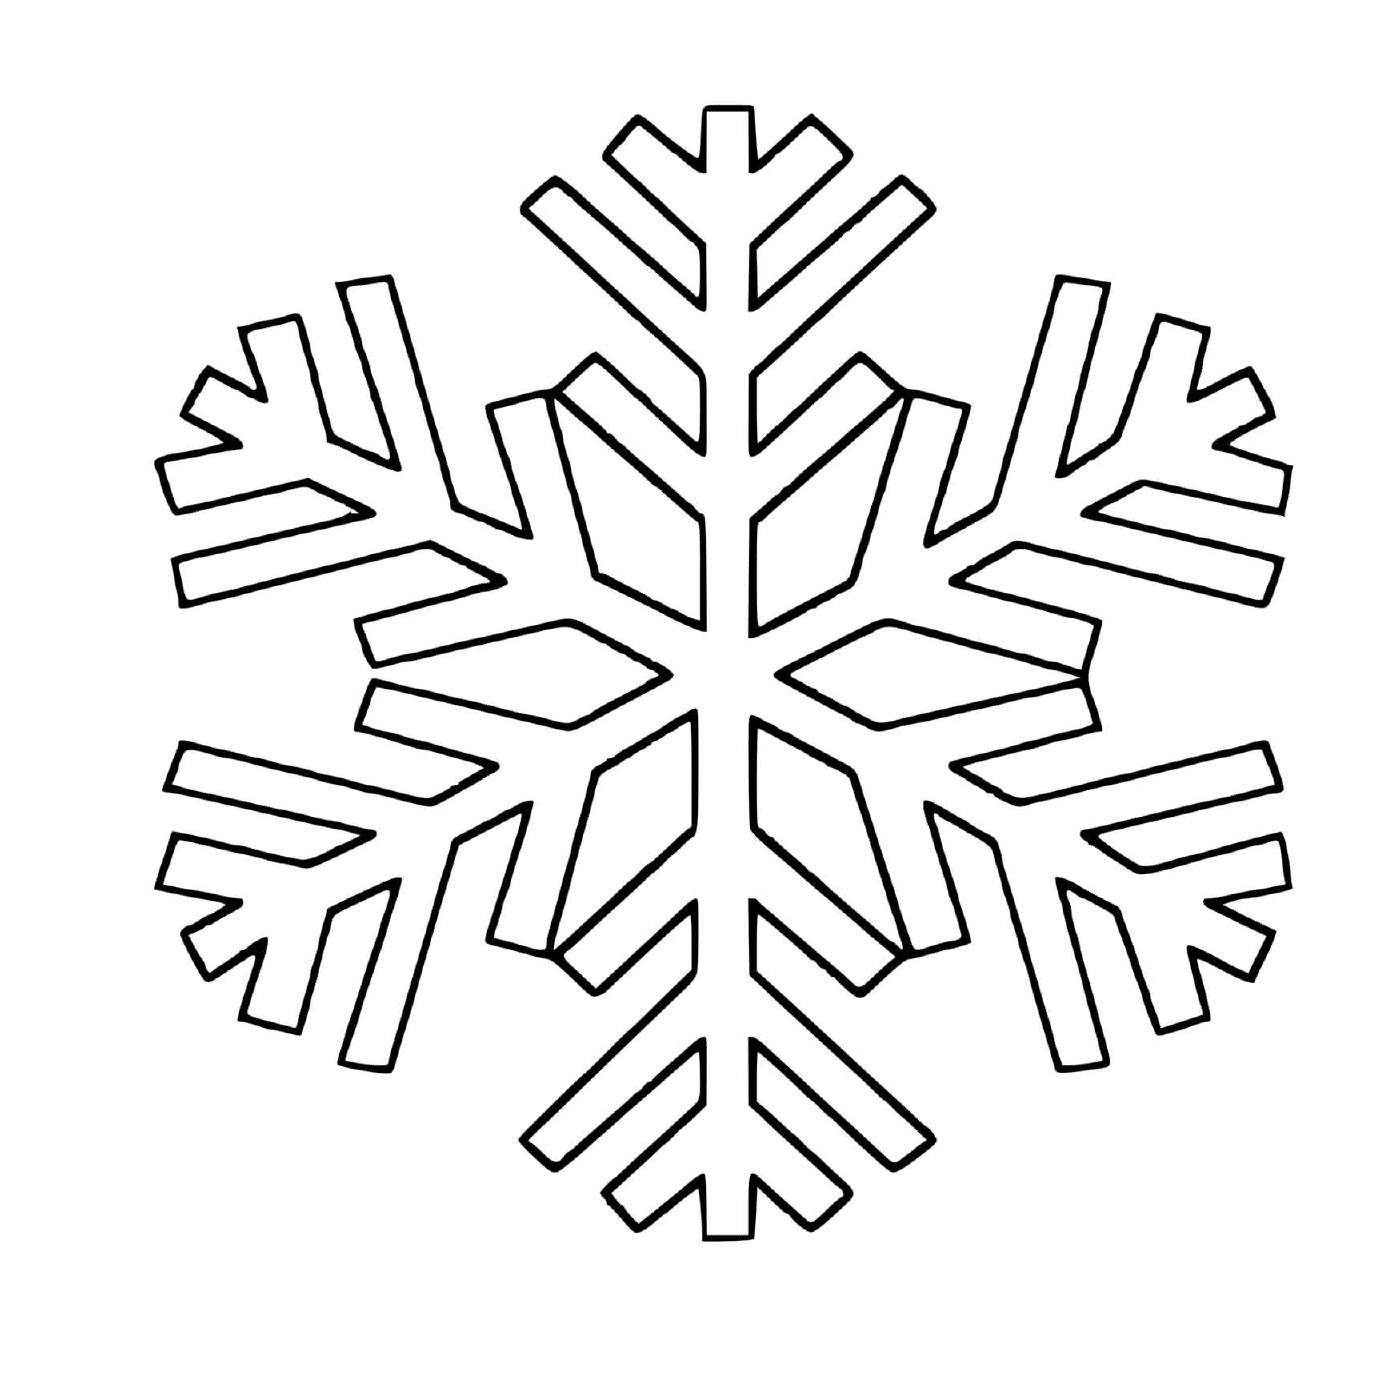  An easy snowflake for children 